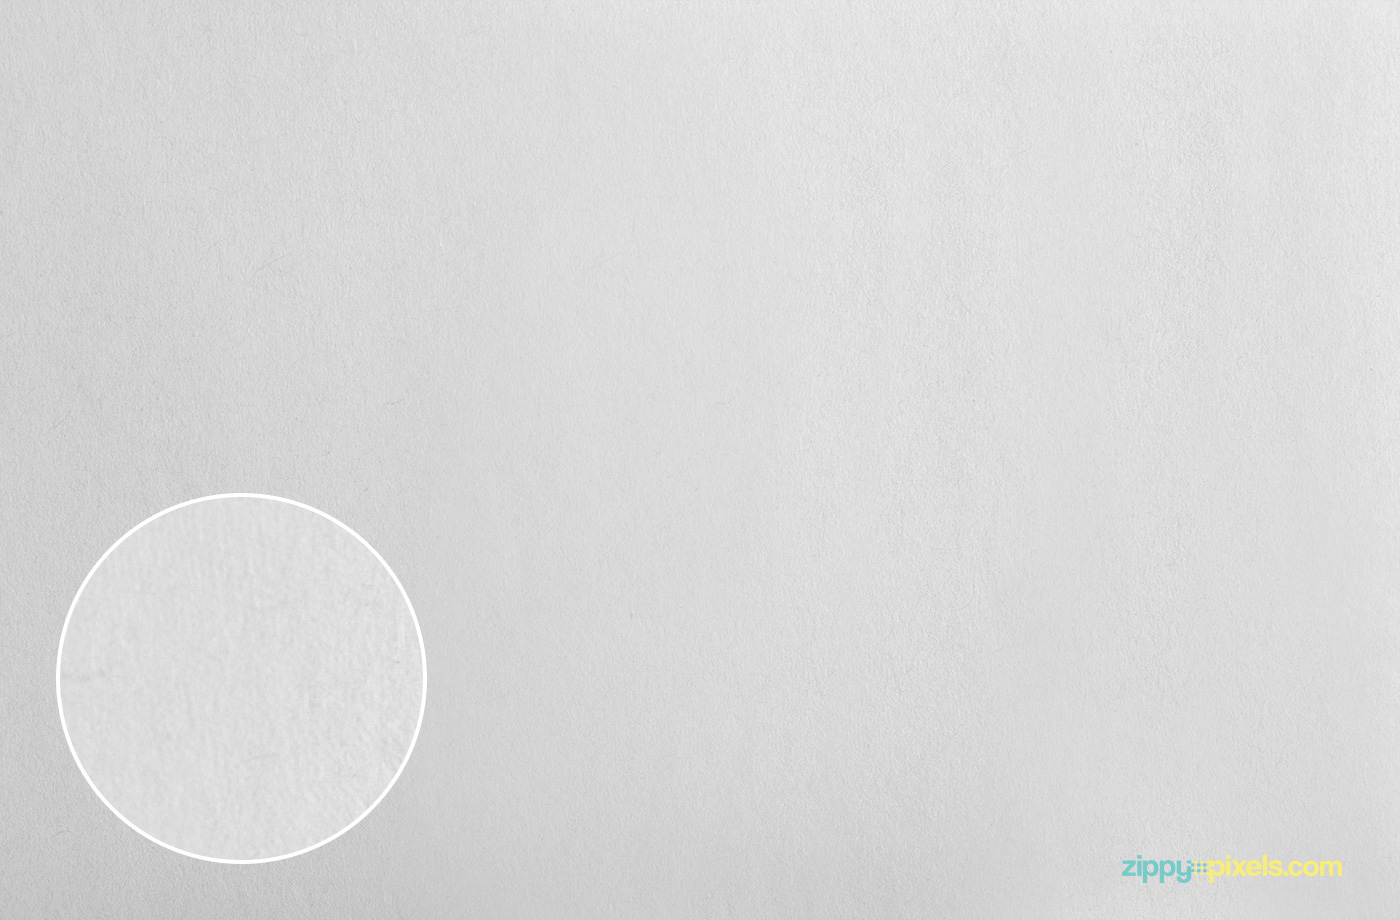 free freebie textures paper backgrounds overlay textures subtle textures texture pack high-res background textures high resolution